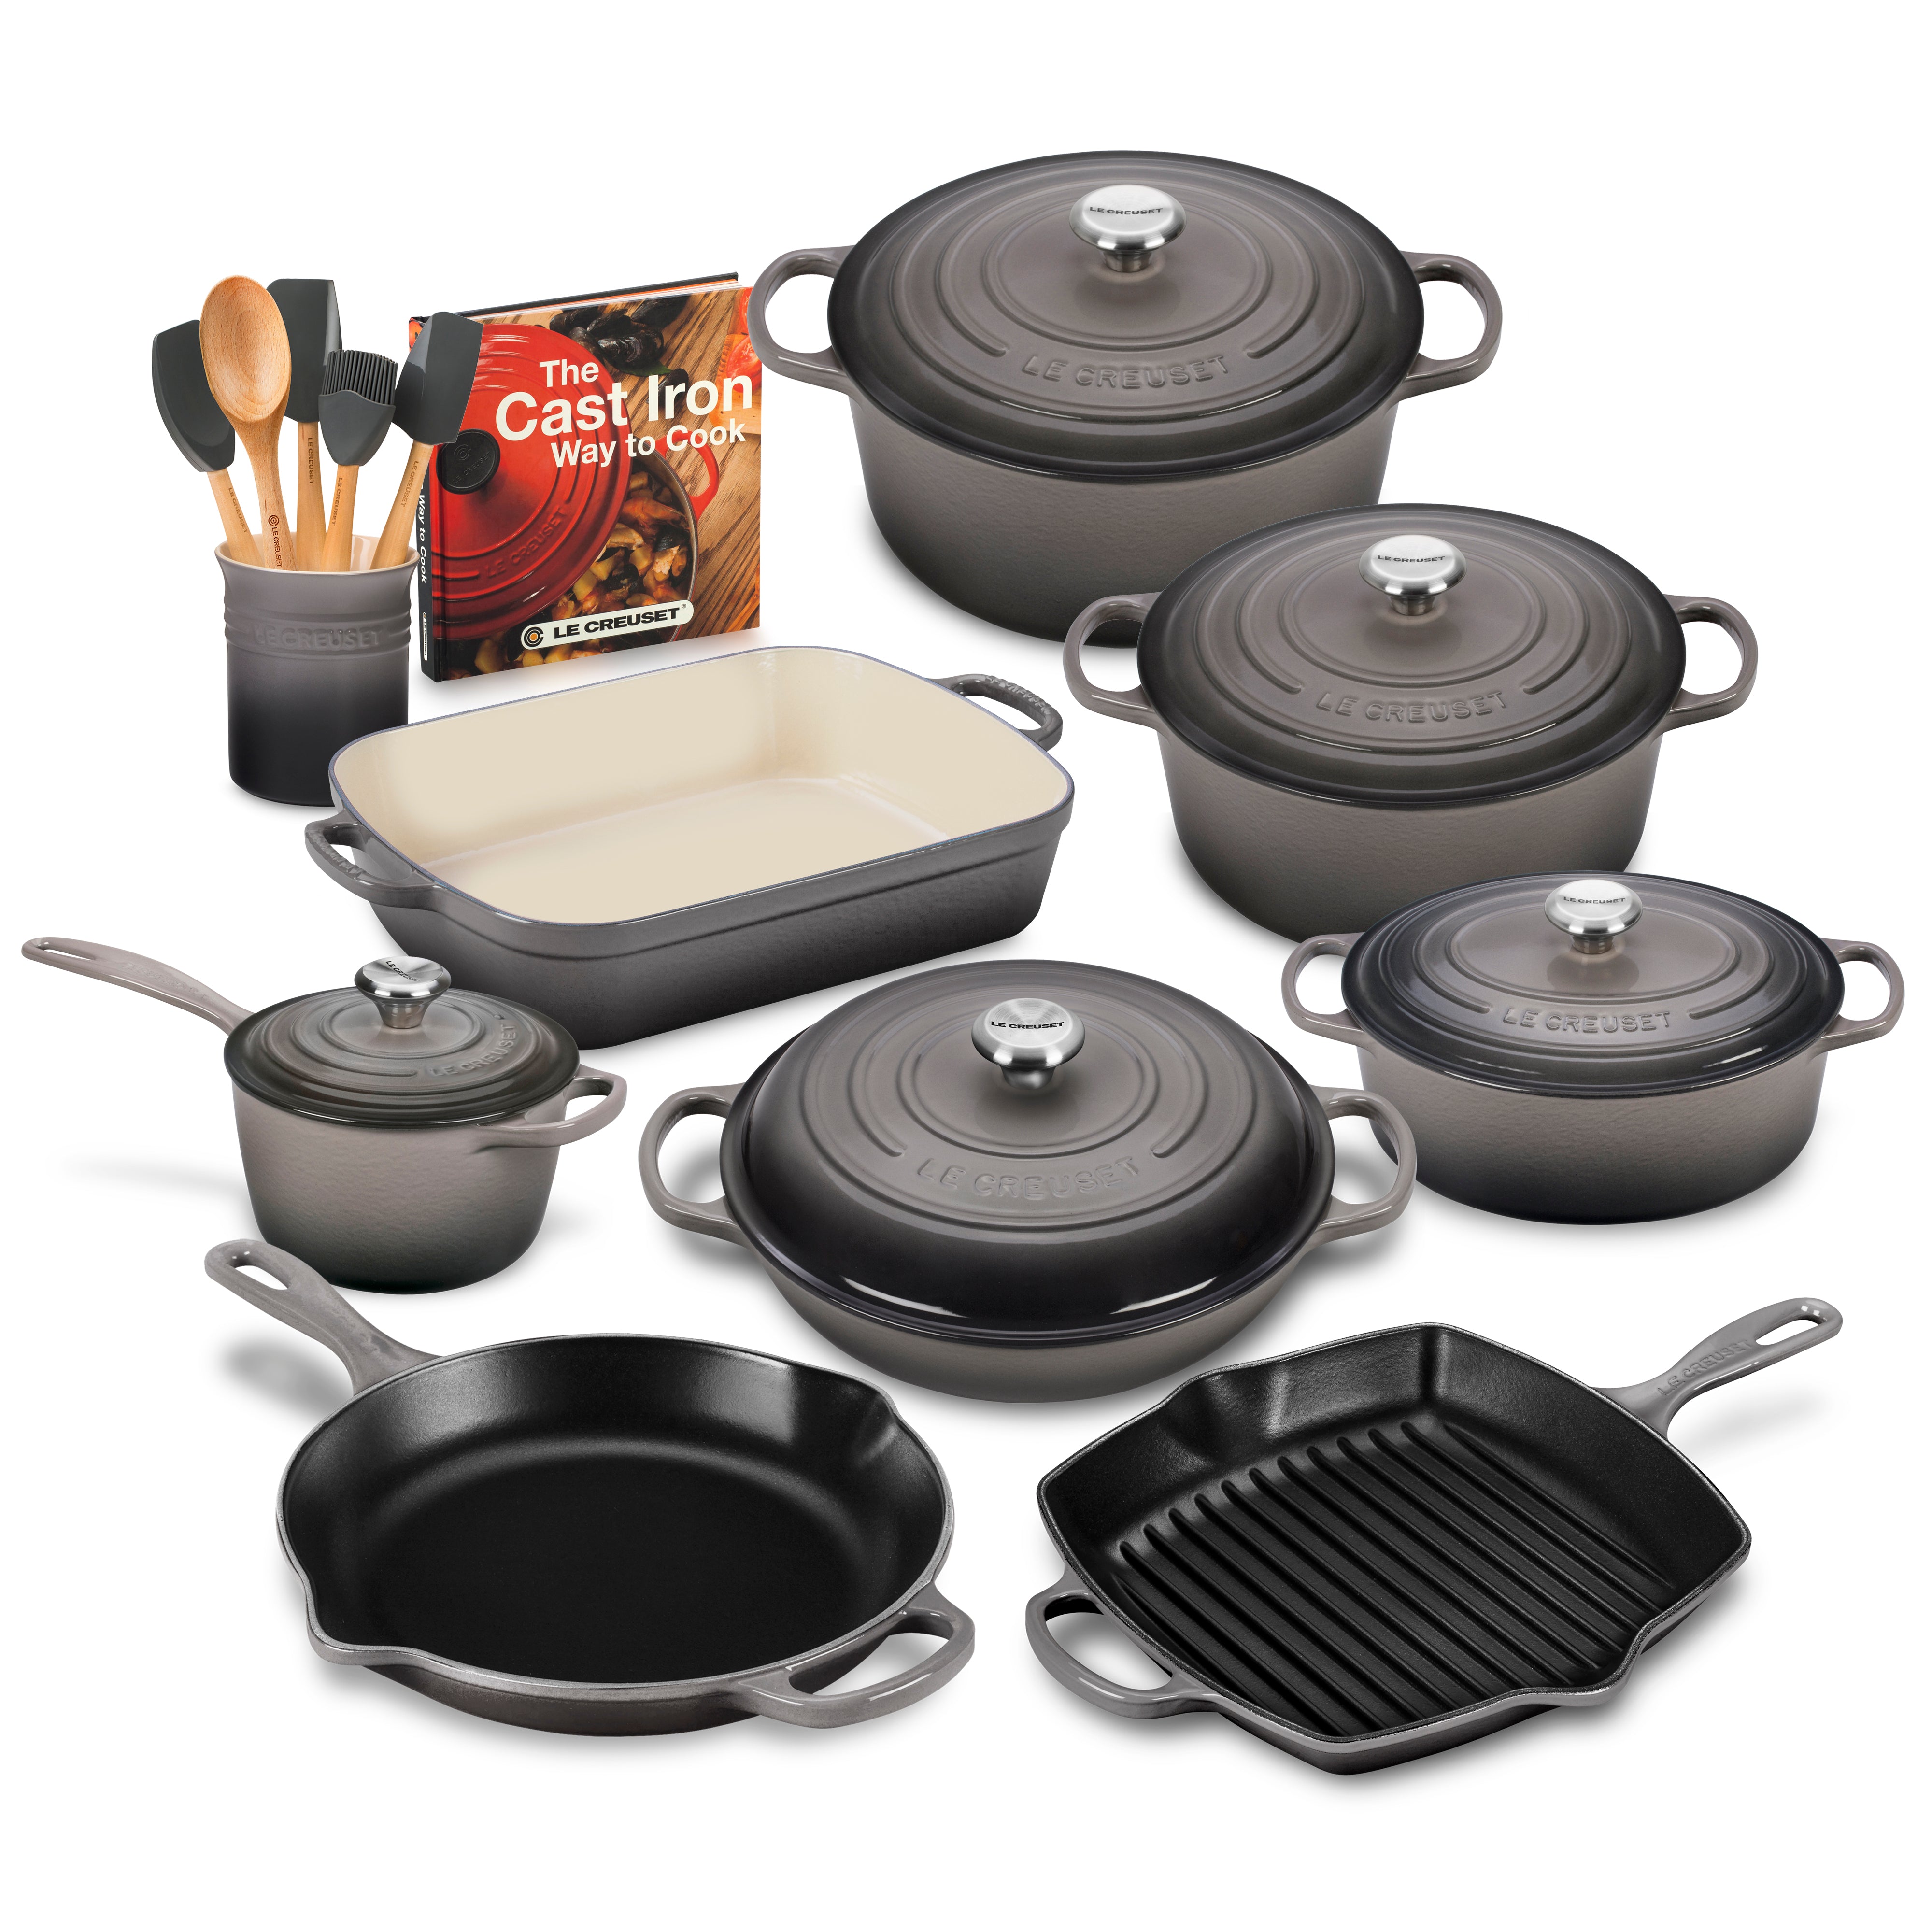 Le Creuset White 20 Piece Mixed Material Cookware Set